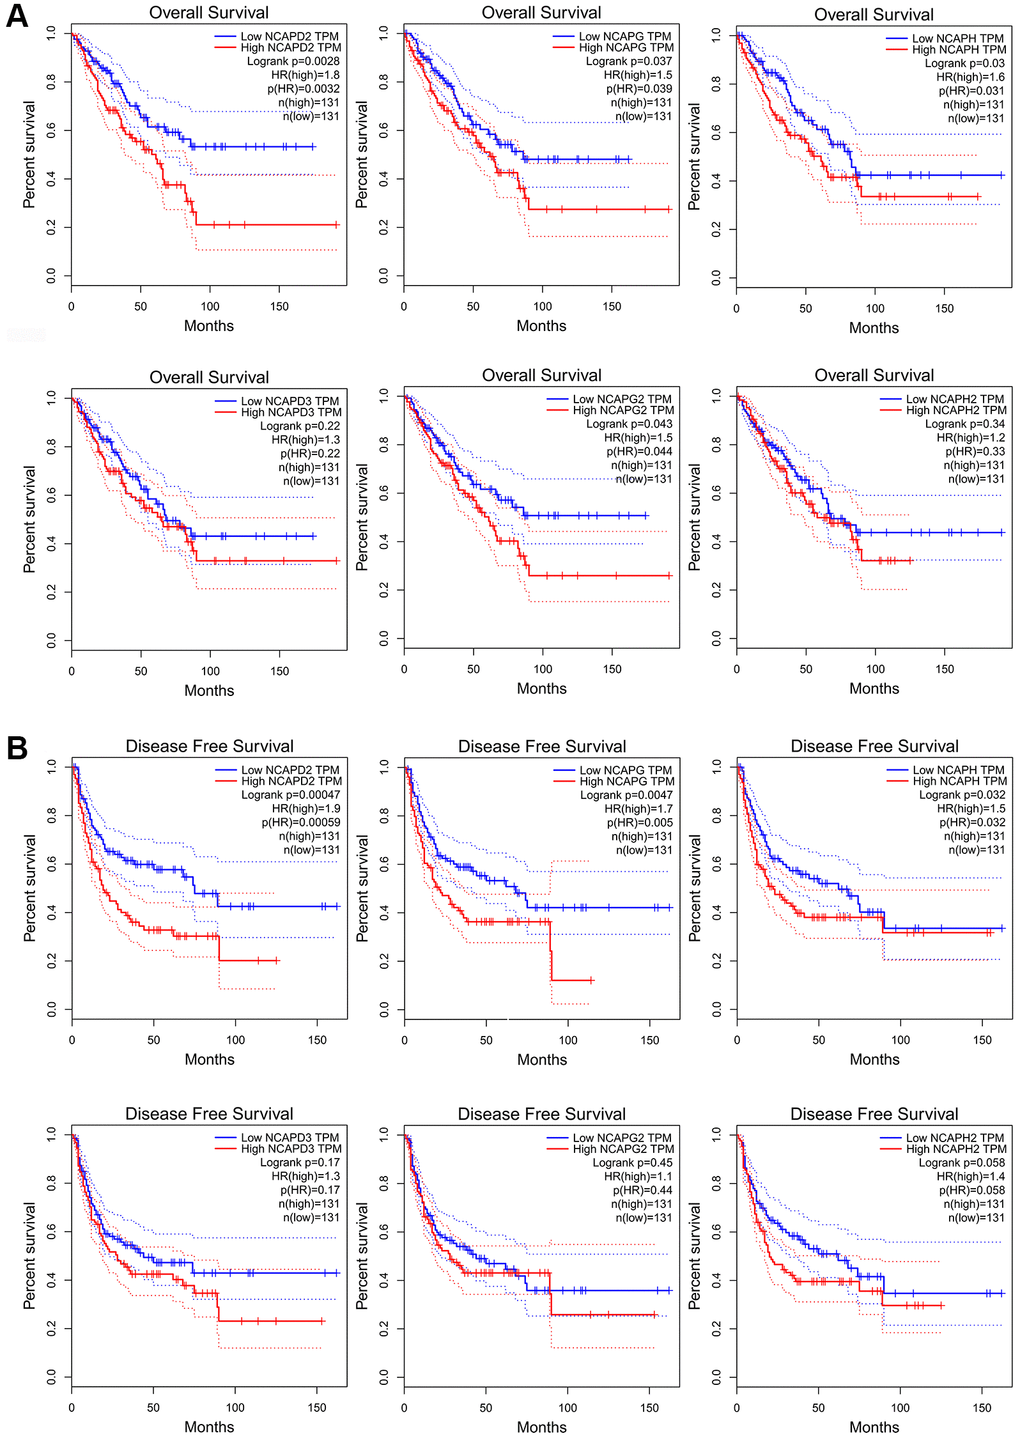 The prognostic value of mRNA level of NCAP factors in sarcoma patients. Higher expression of NCAP genes is associated with worse (A) overall survival and (B) disease-free survival. Abbreviation: HR: hazard ratio.